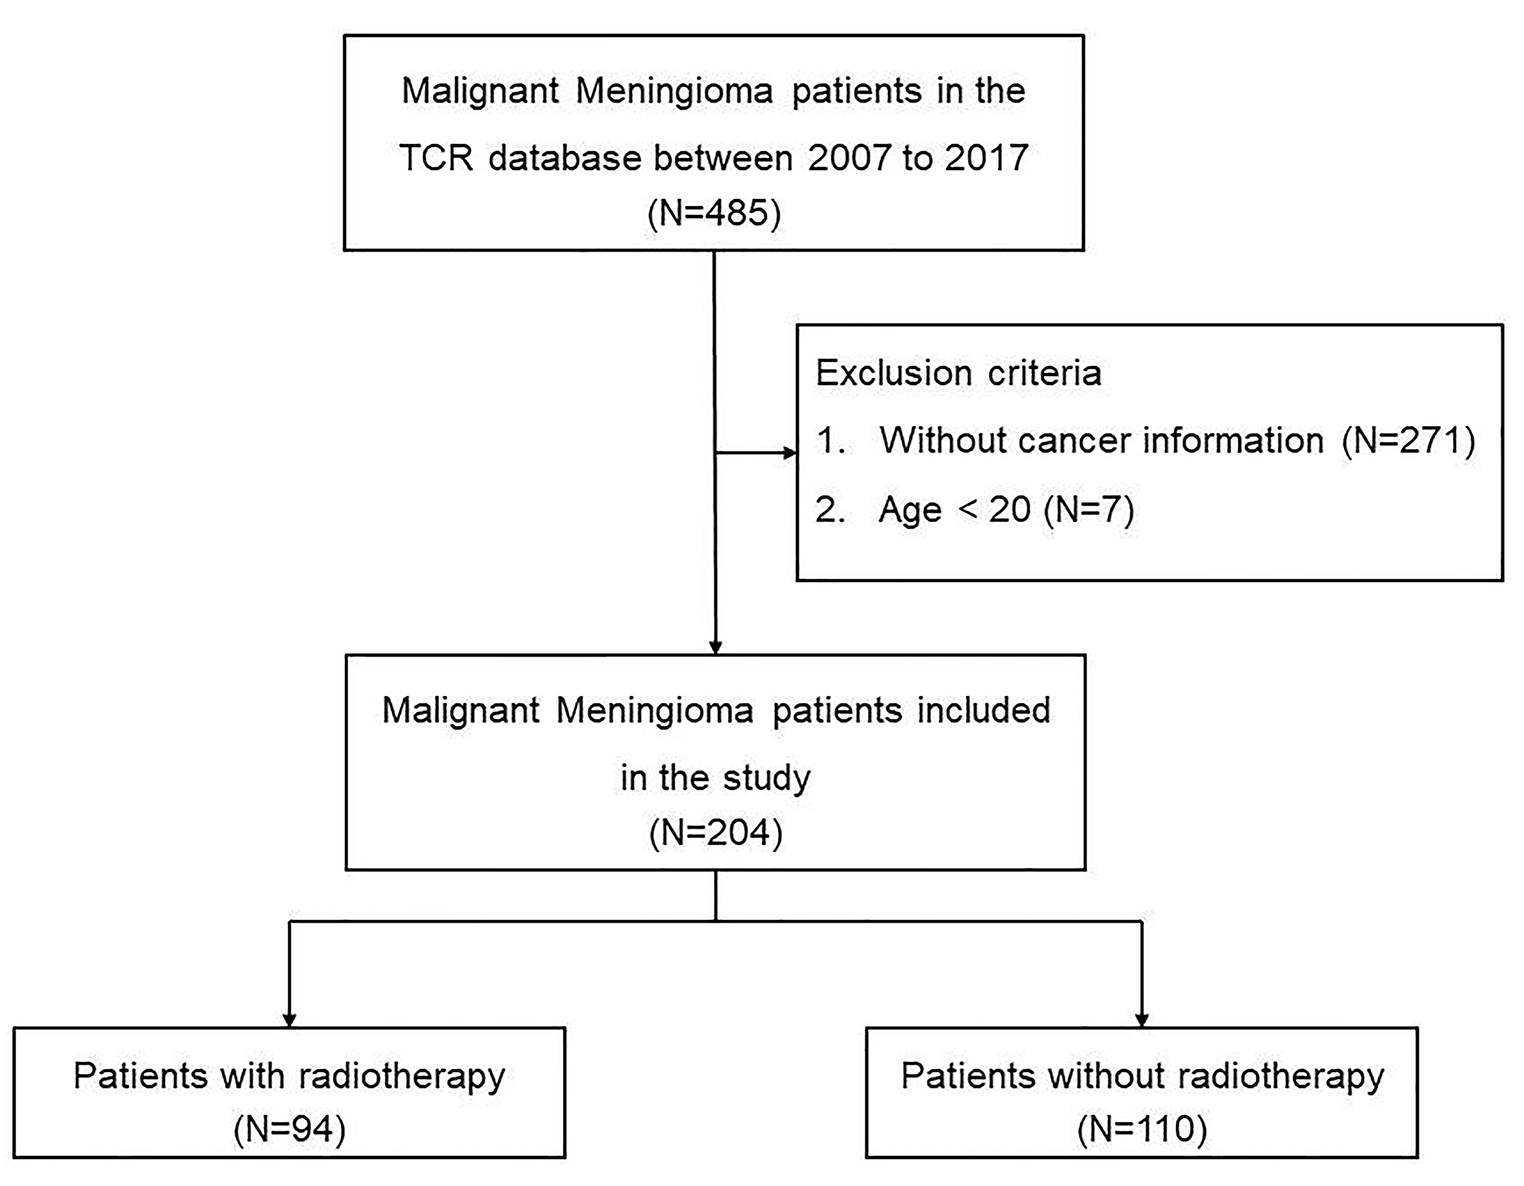 The role of adjuvant radiotherapy for intracranial malignant meningiomas: analysis of a nationwide database